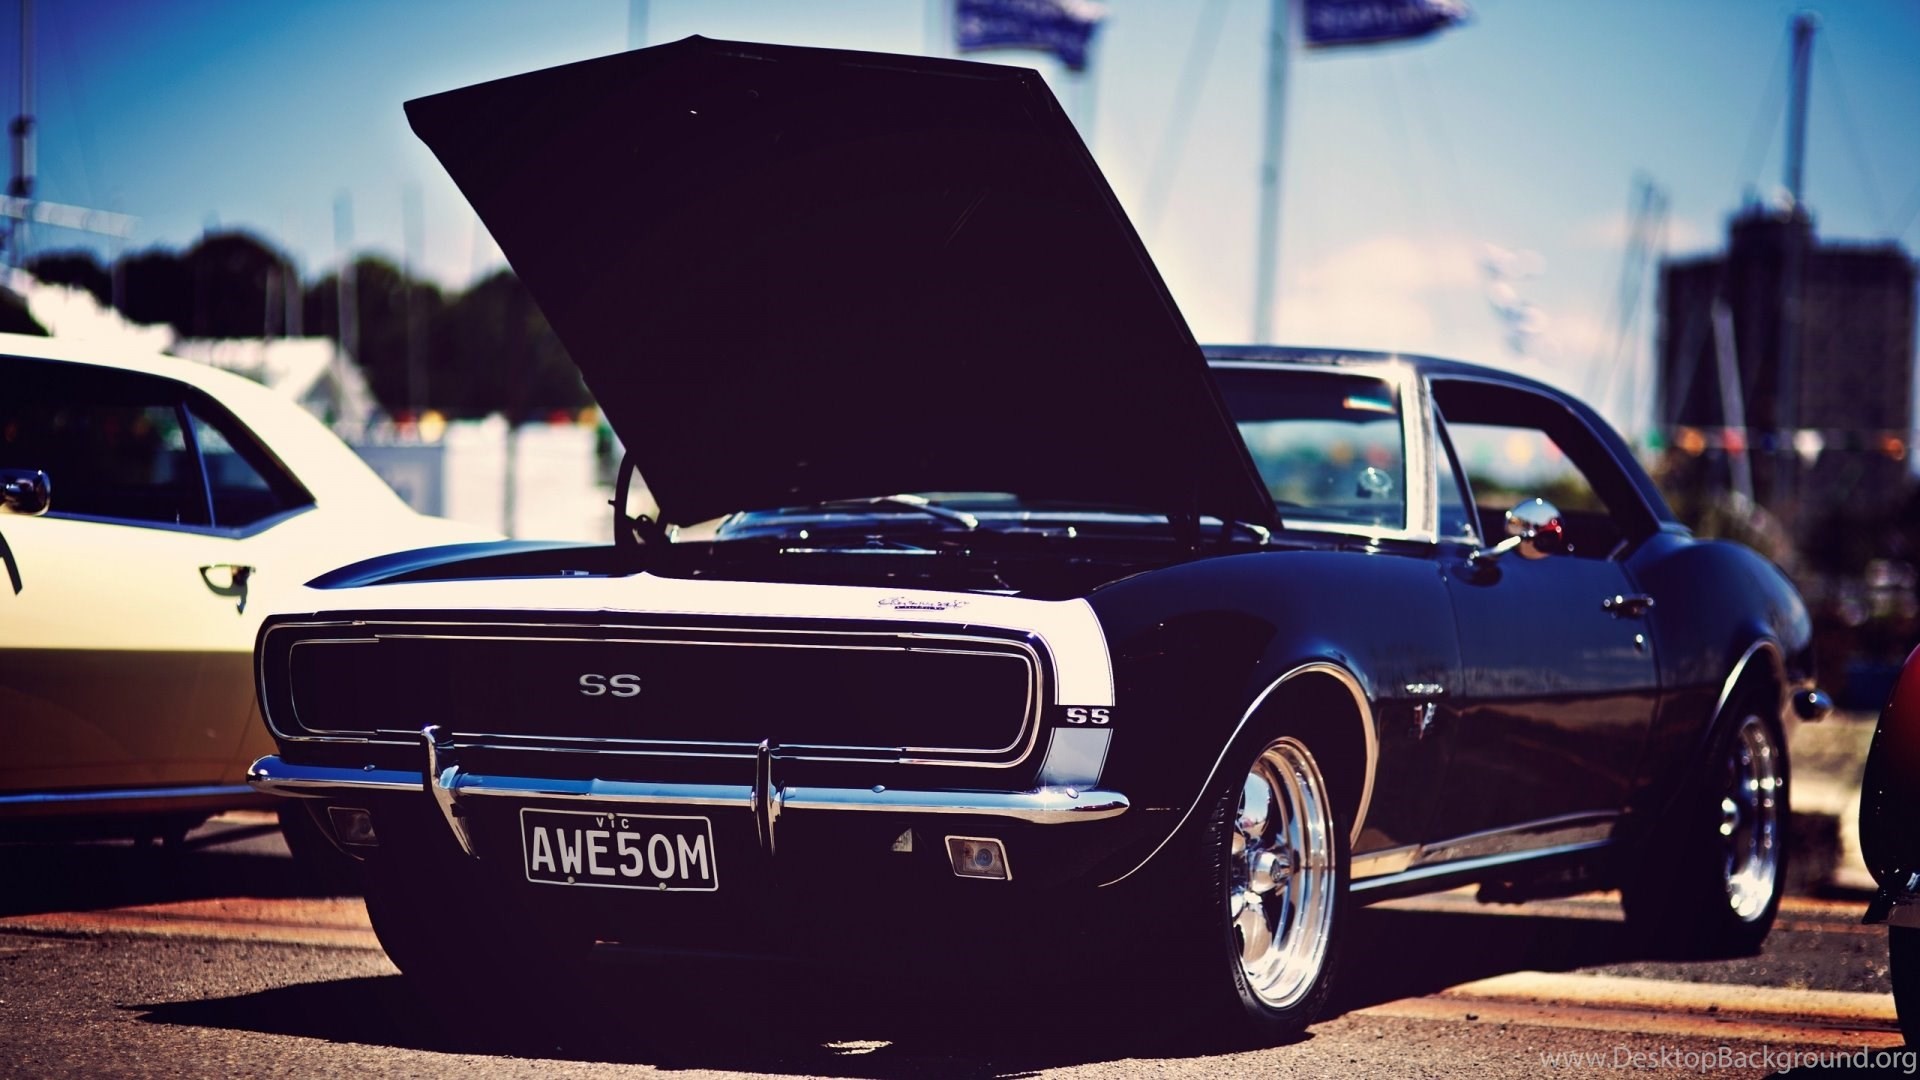 1920x1080 High Resolution American Muscle Car Wallpapers 1920Ã1080 Full Size .